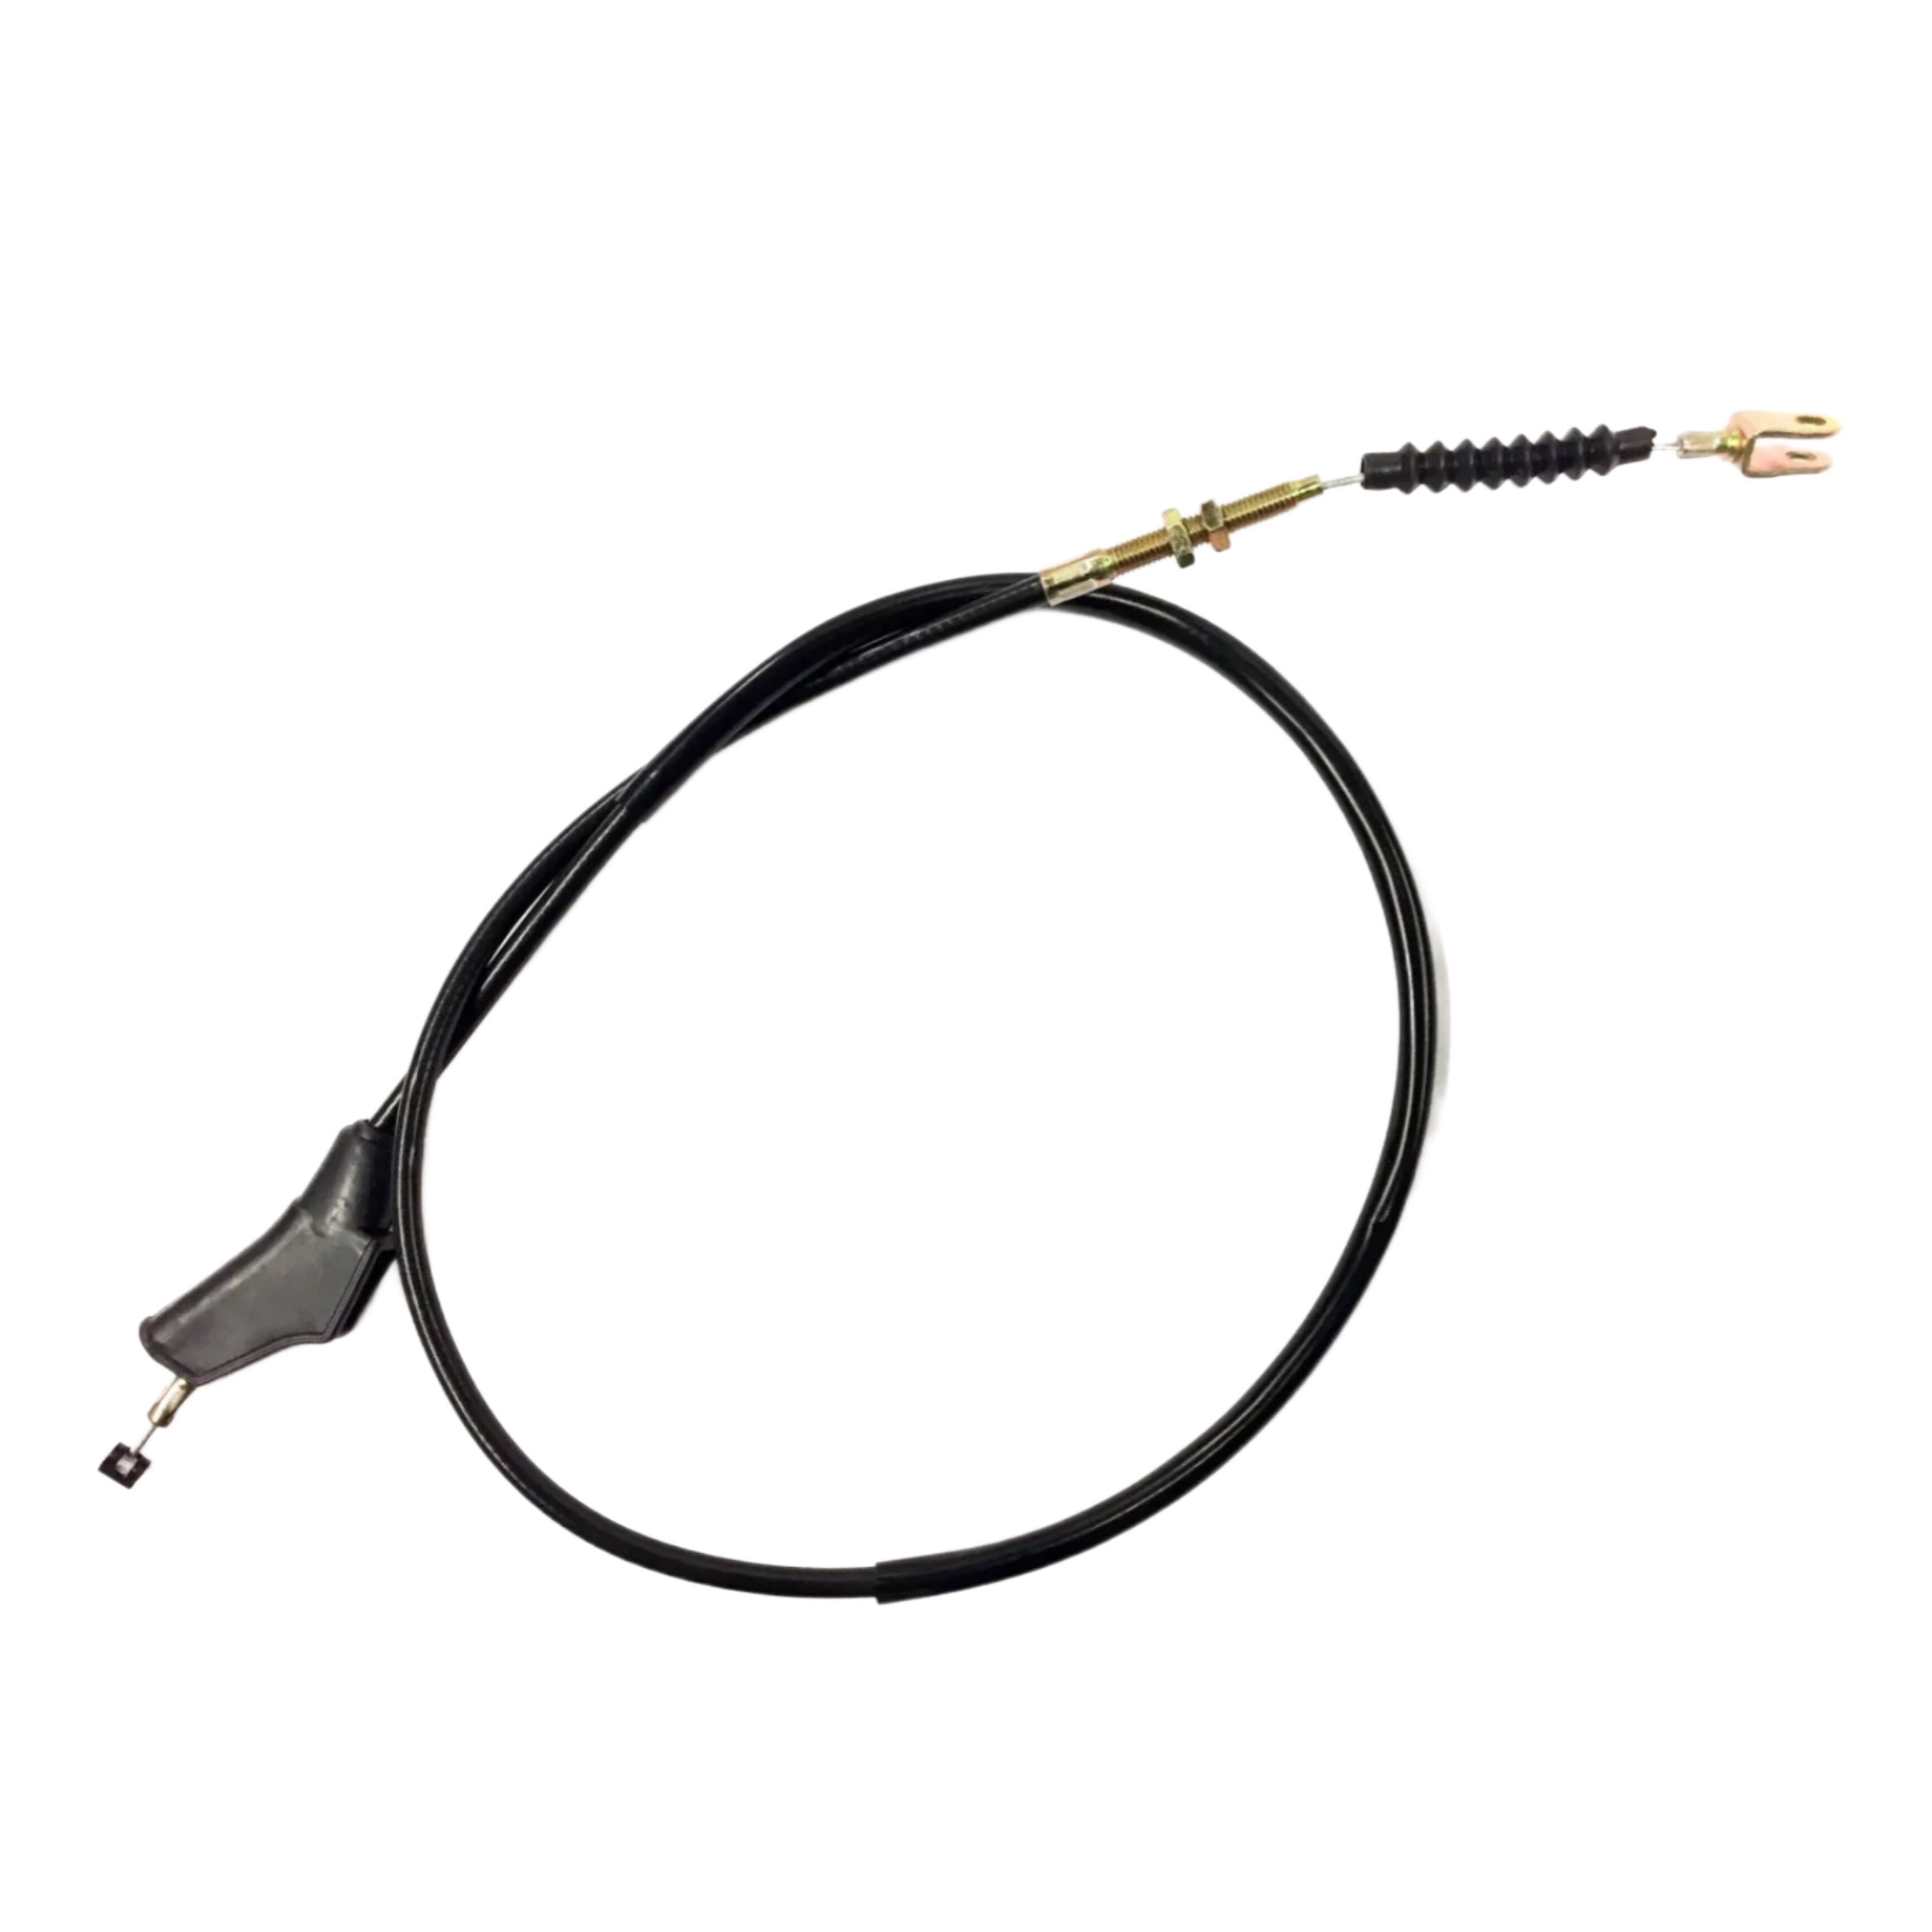 Clutch Cable - QM125 GY-2B